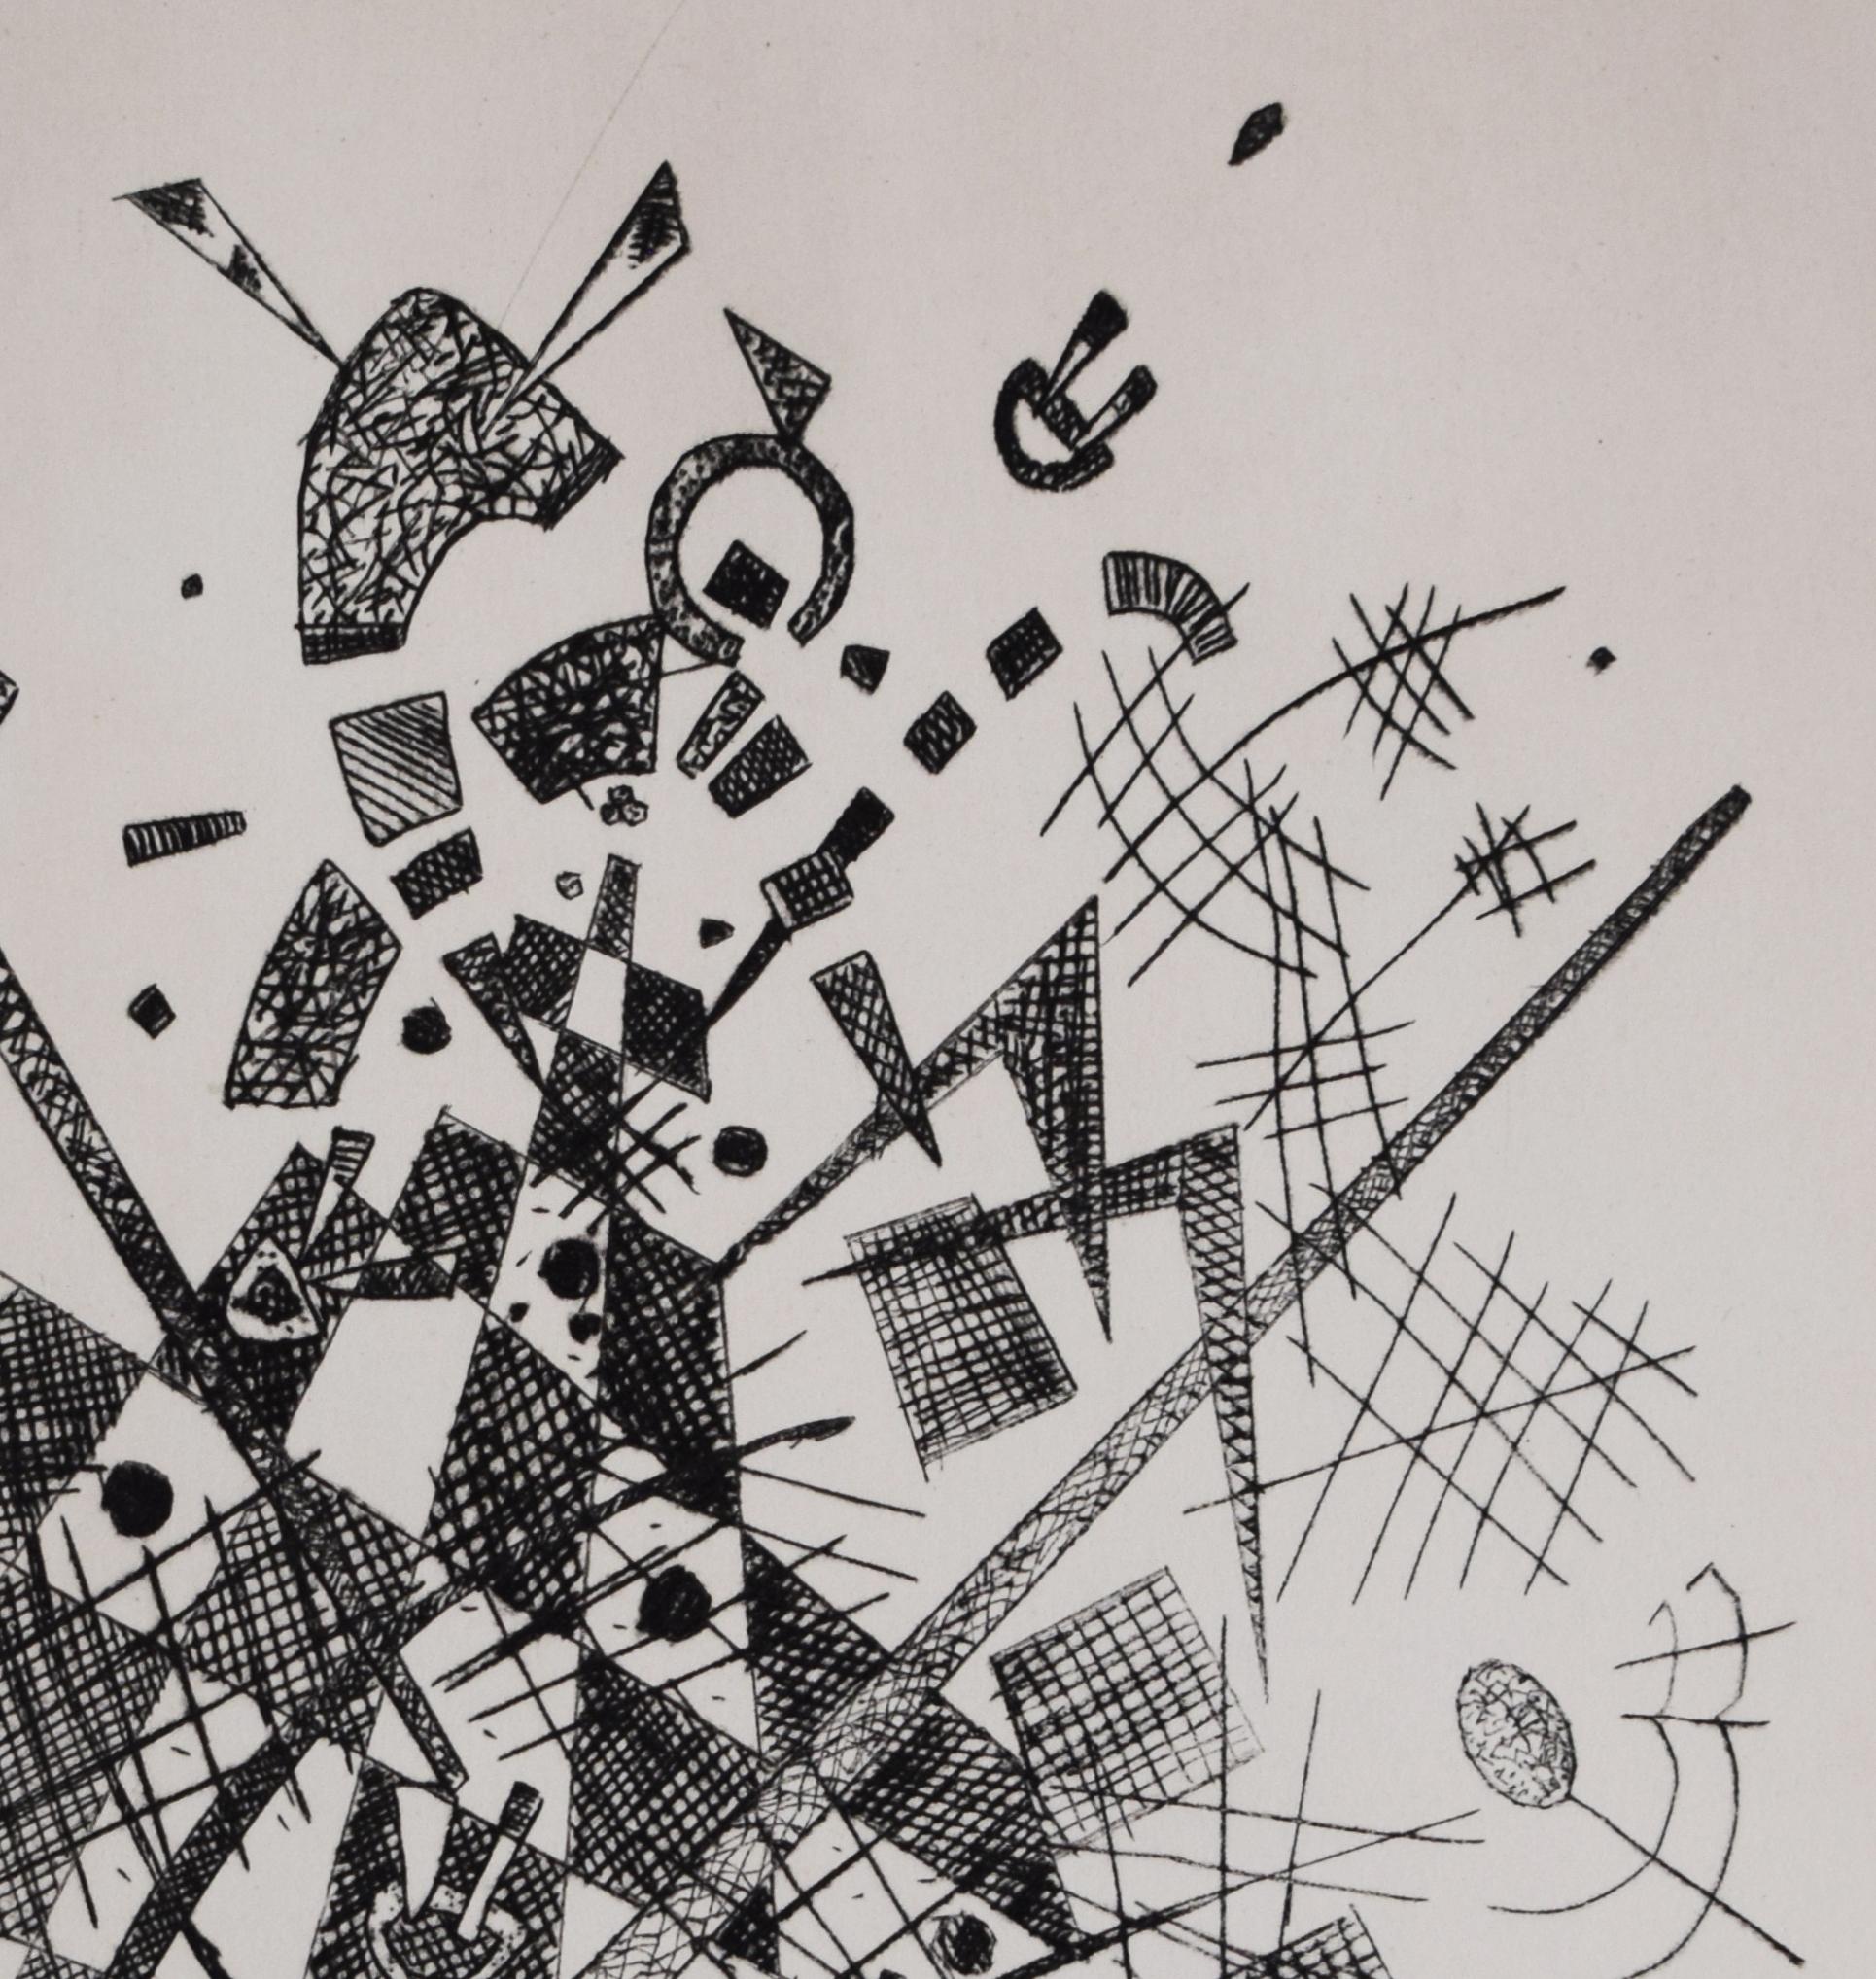 This original drypoint is hand signed in pencil by the artist “Kandinsky” at the lower right margin.
It is also monogrammed and dated in the plate “VK 22” at the lower left image.
It is the ninth of the twelve plates from Kandinsky’s seminal